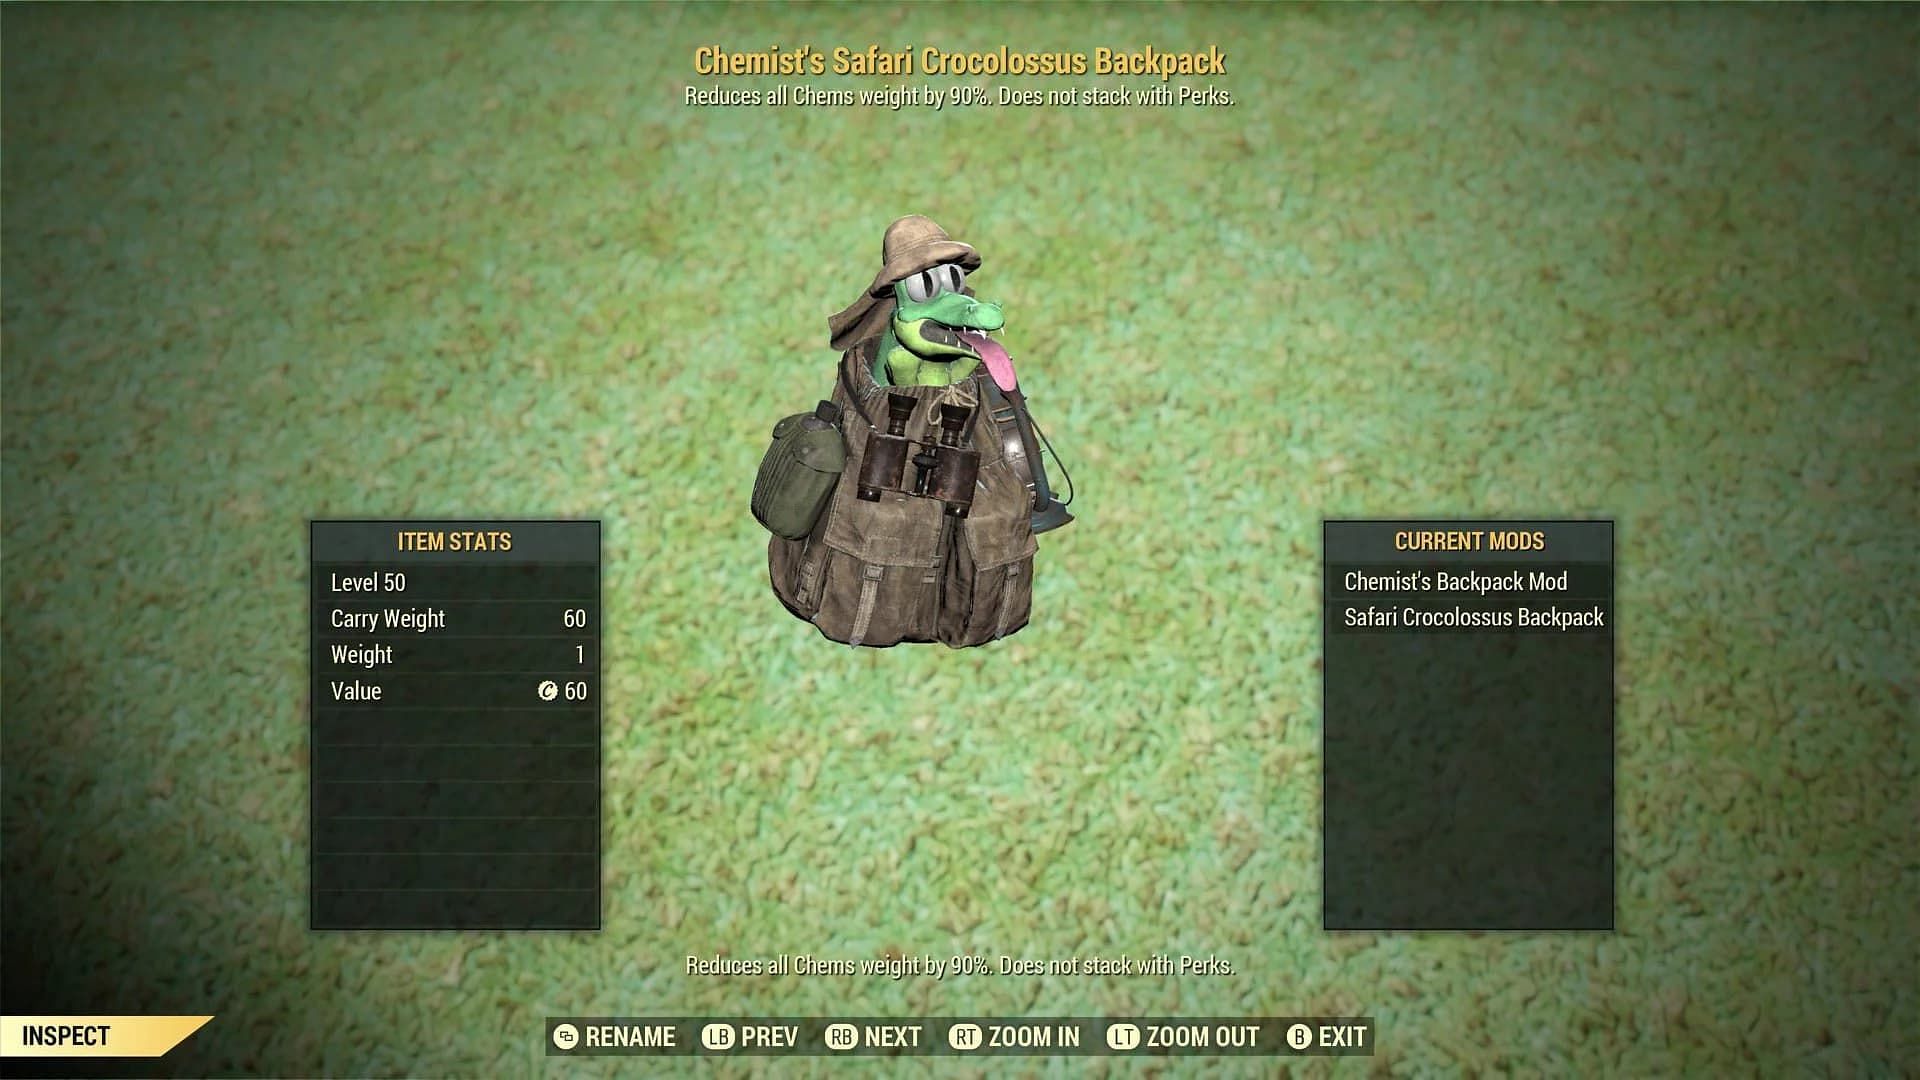 This is one modded variant of the Safari Crocolossus backpack in Fallout 76 (Image via Bethesda)